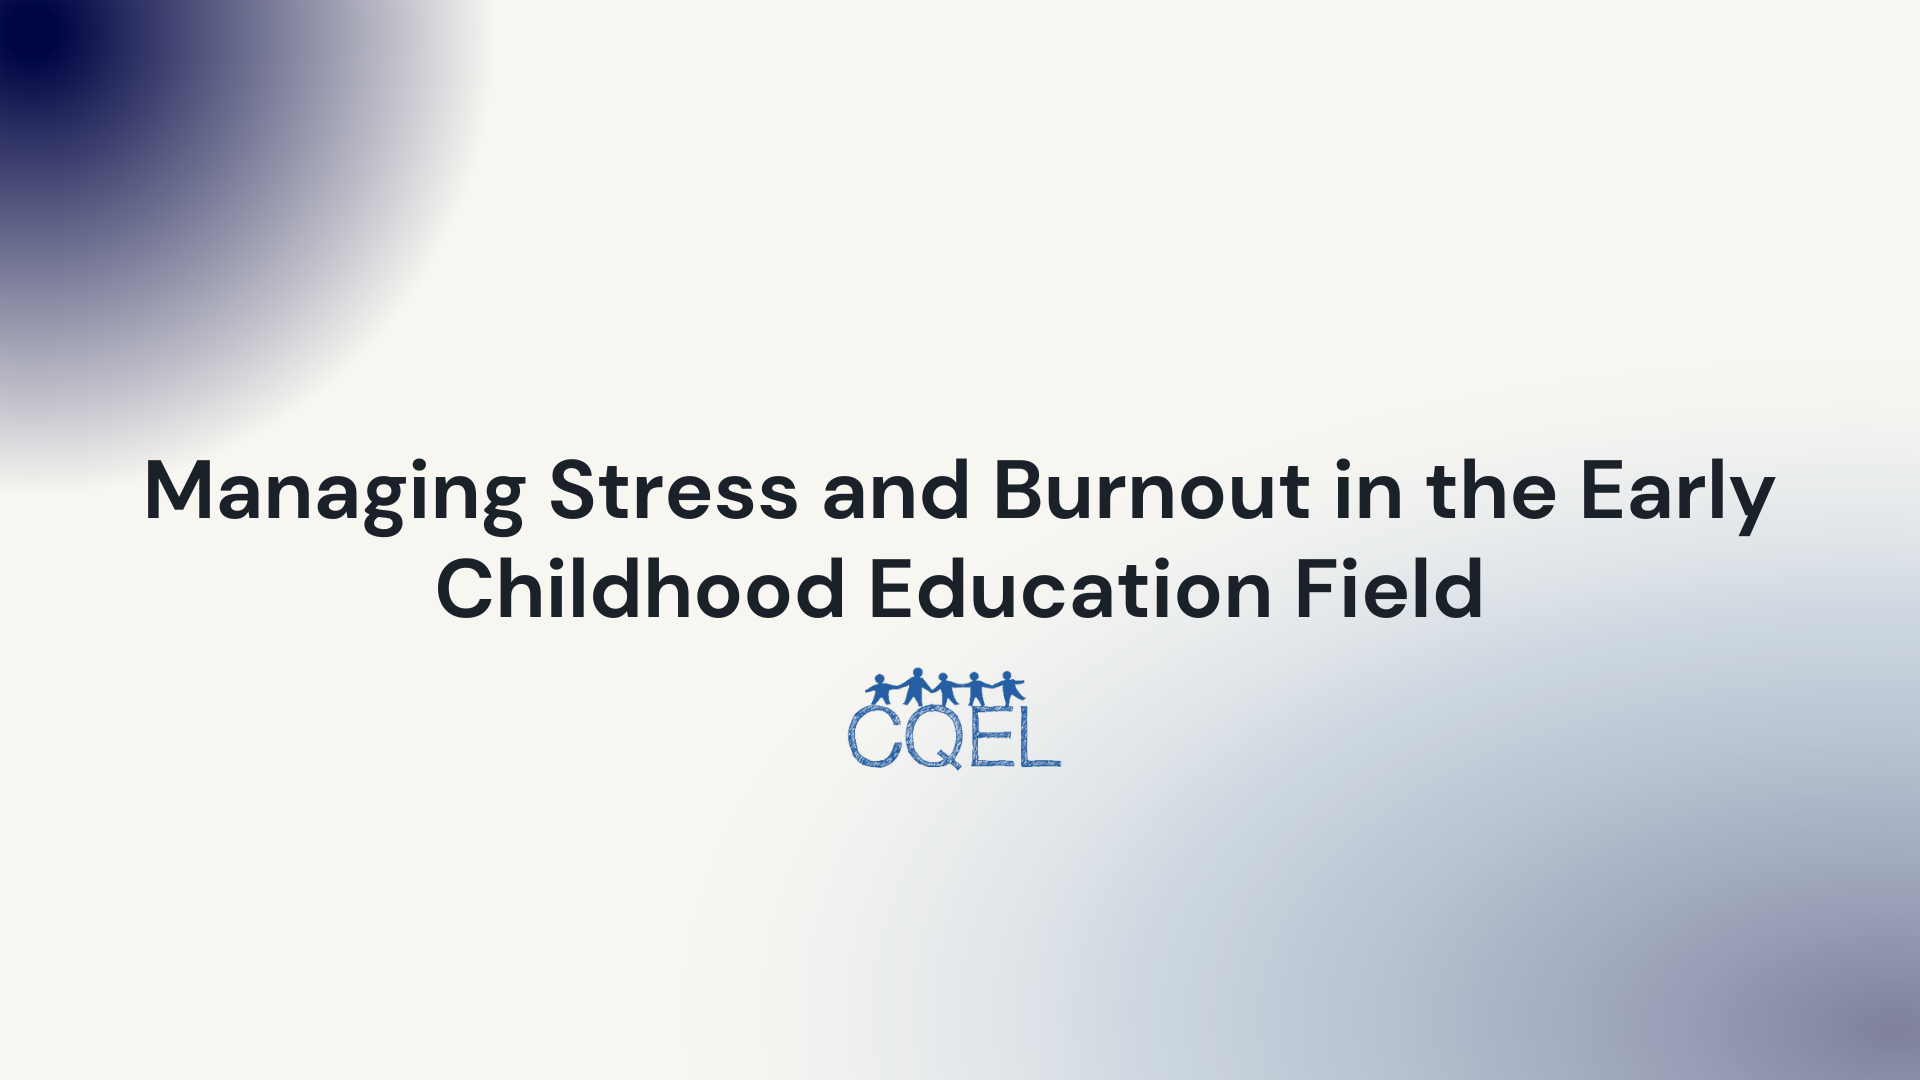 Managing Stress and Burnout in the Early Childhood Education Field